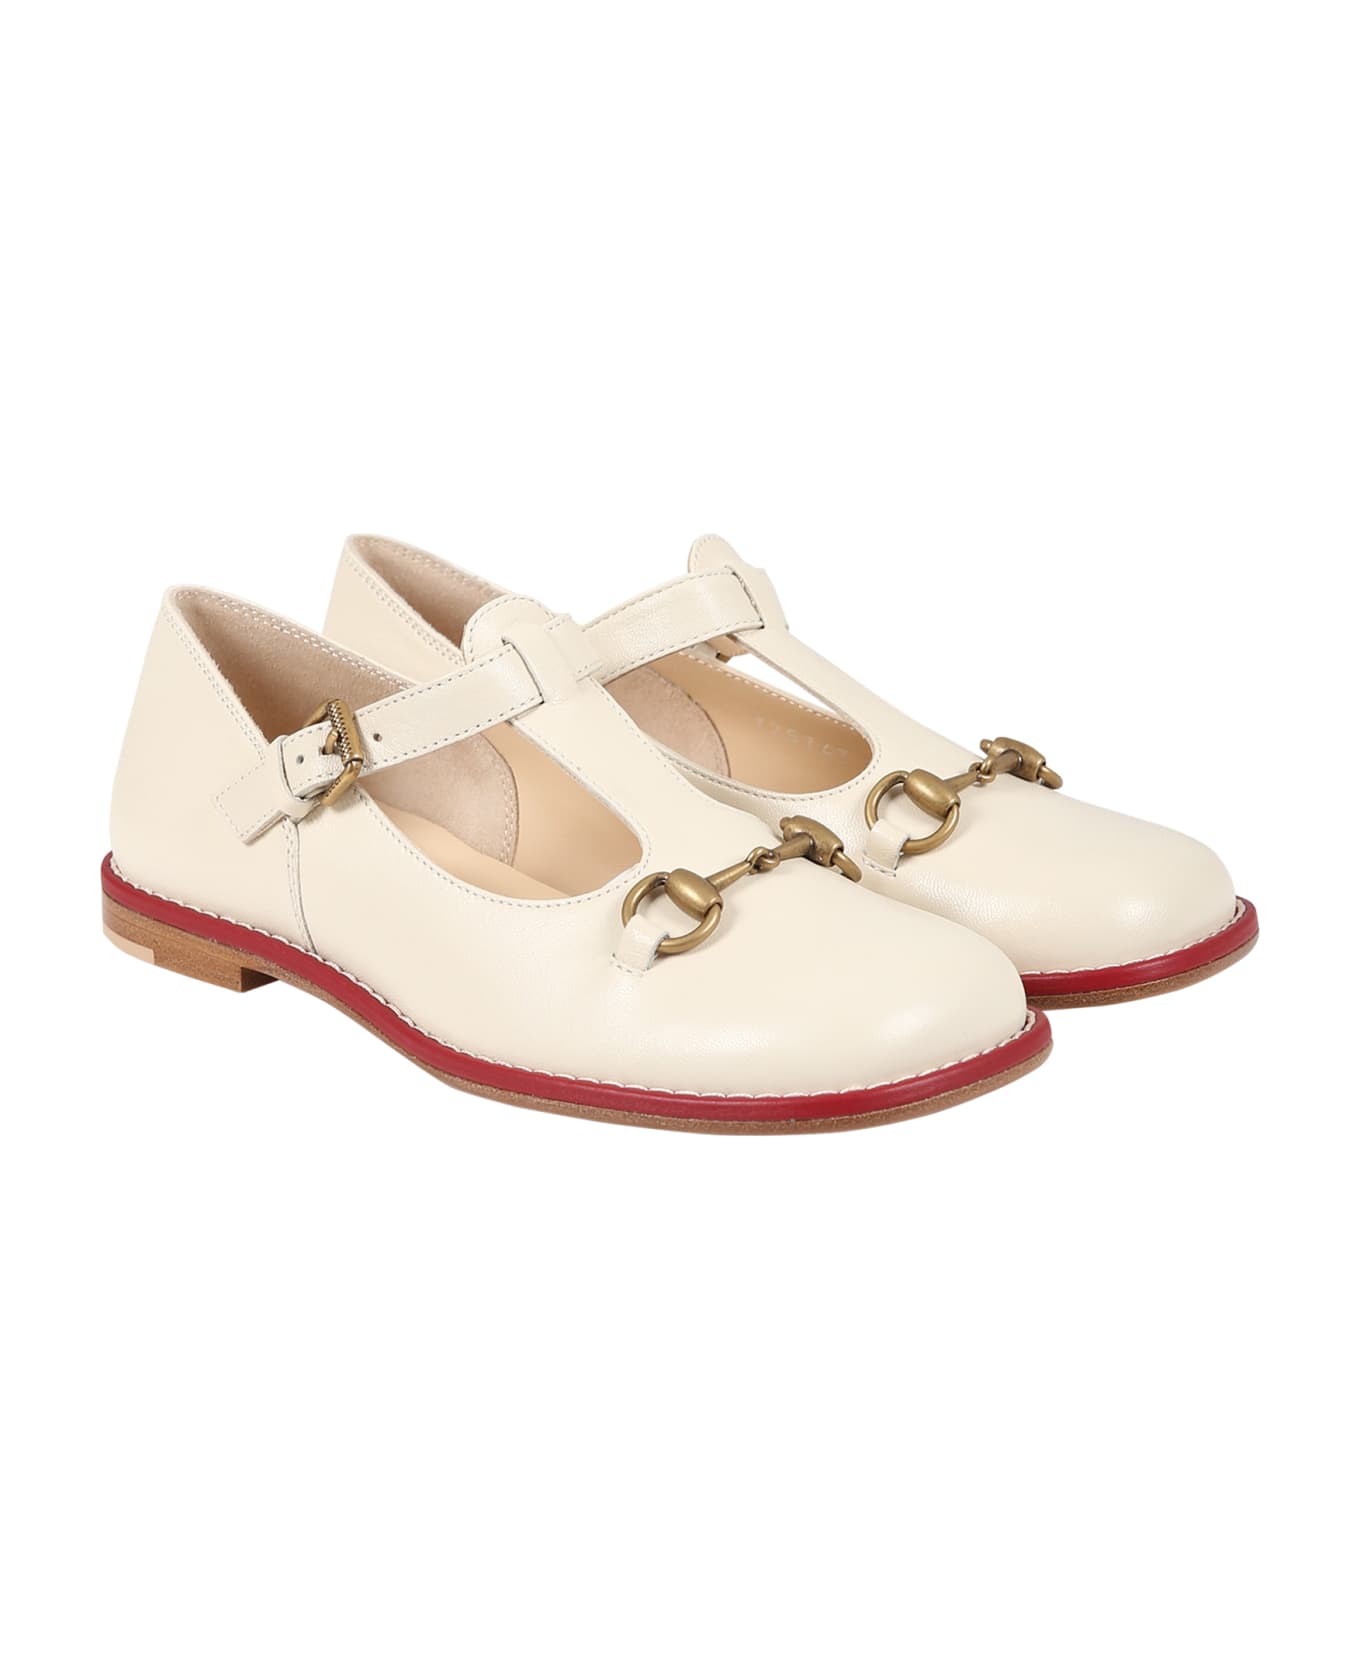 Gucci Ivory Ballet Flats For Girl With Iconic Horsebit - White シューズ